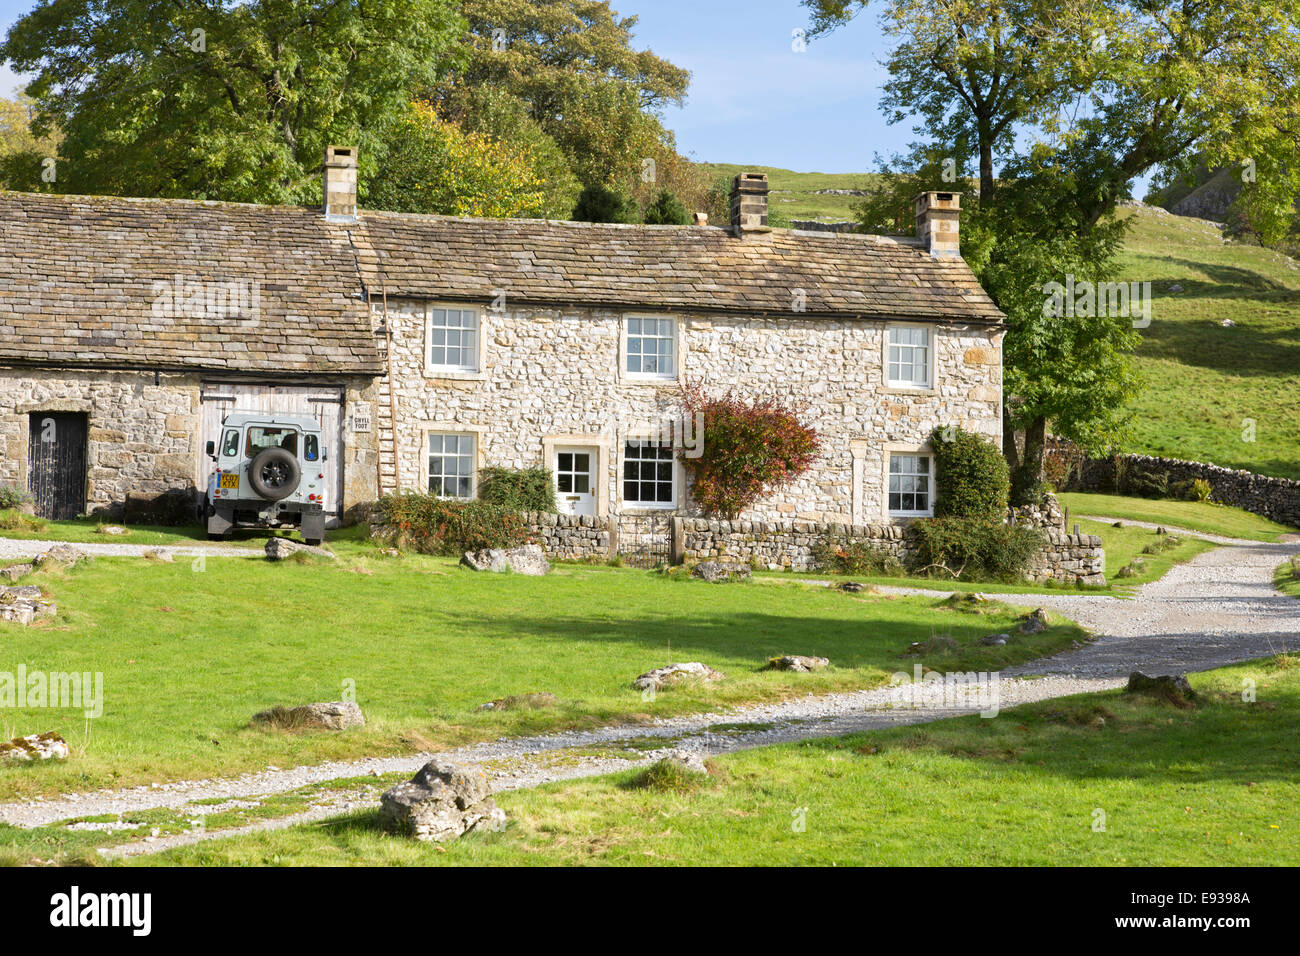 Stone farm cottages in the dales village of Conistone near Grassington, North Yorkshire, England, UK Stock Photo